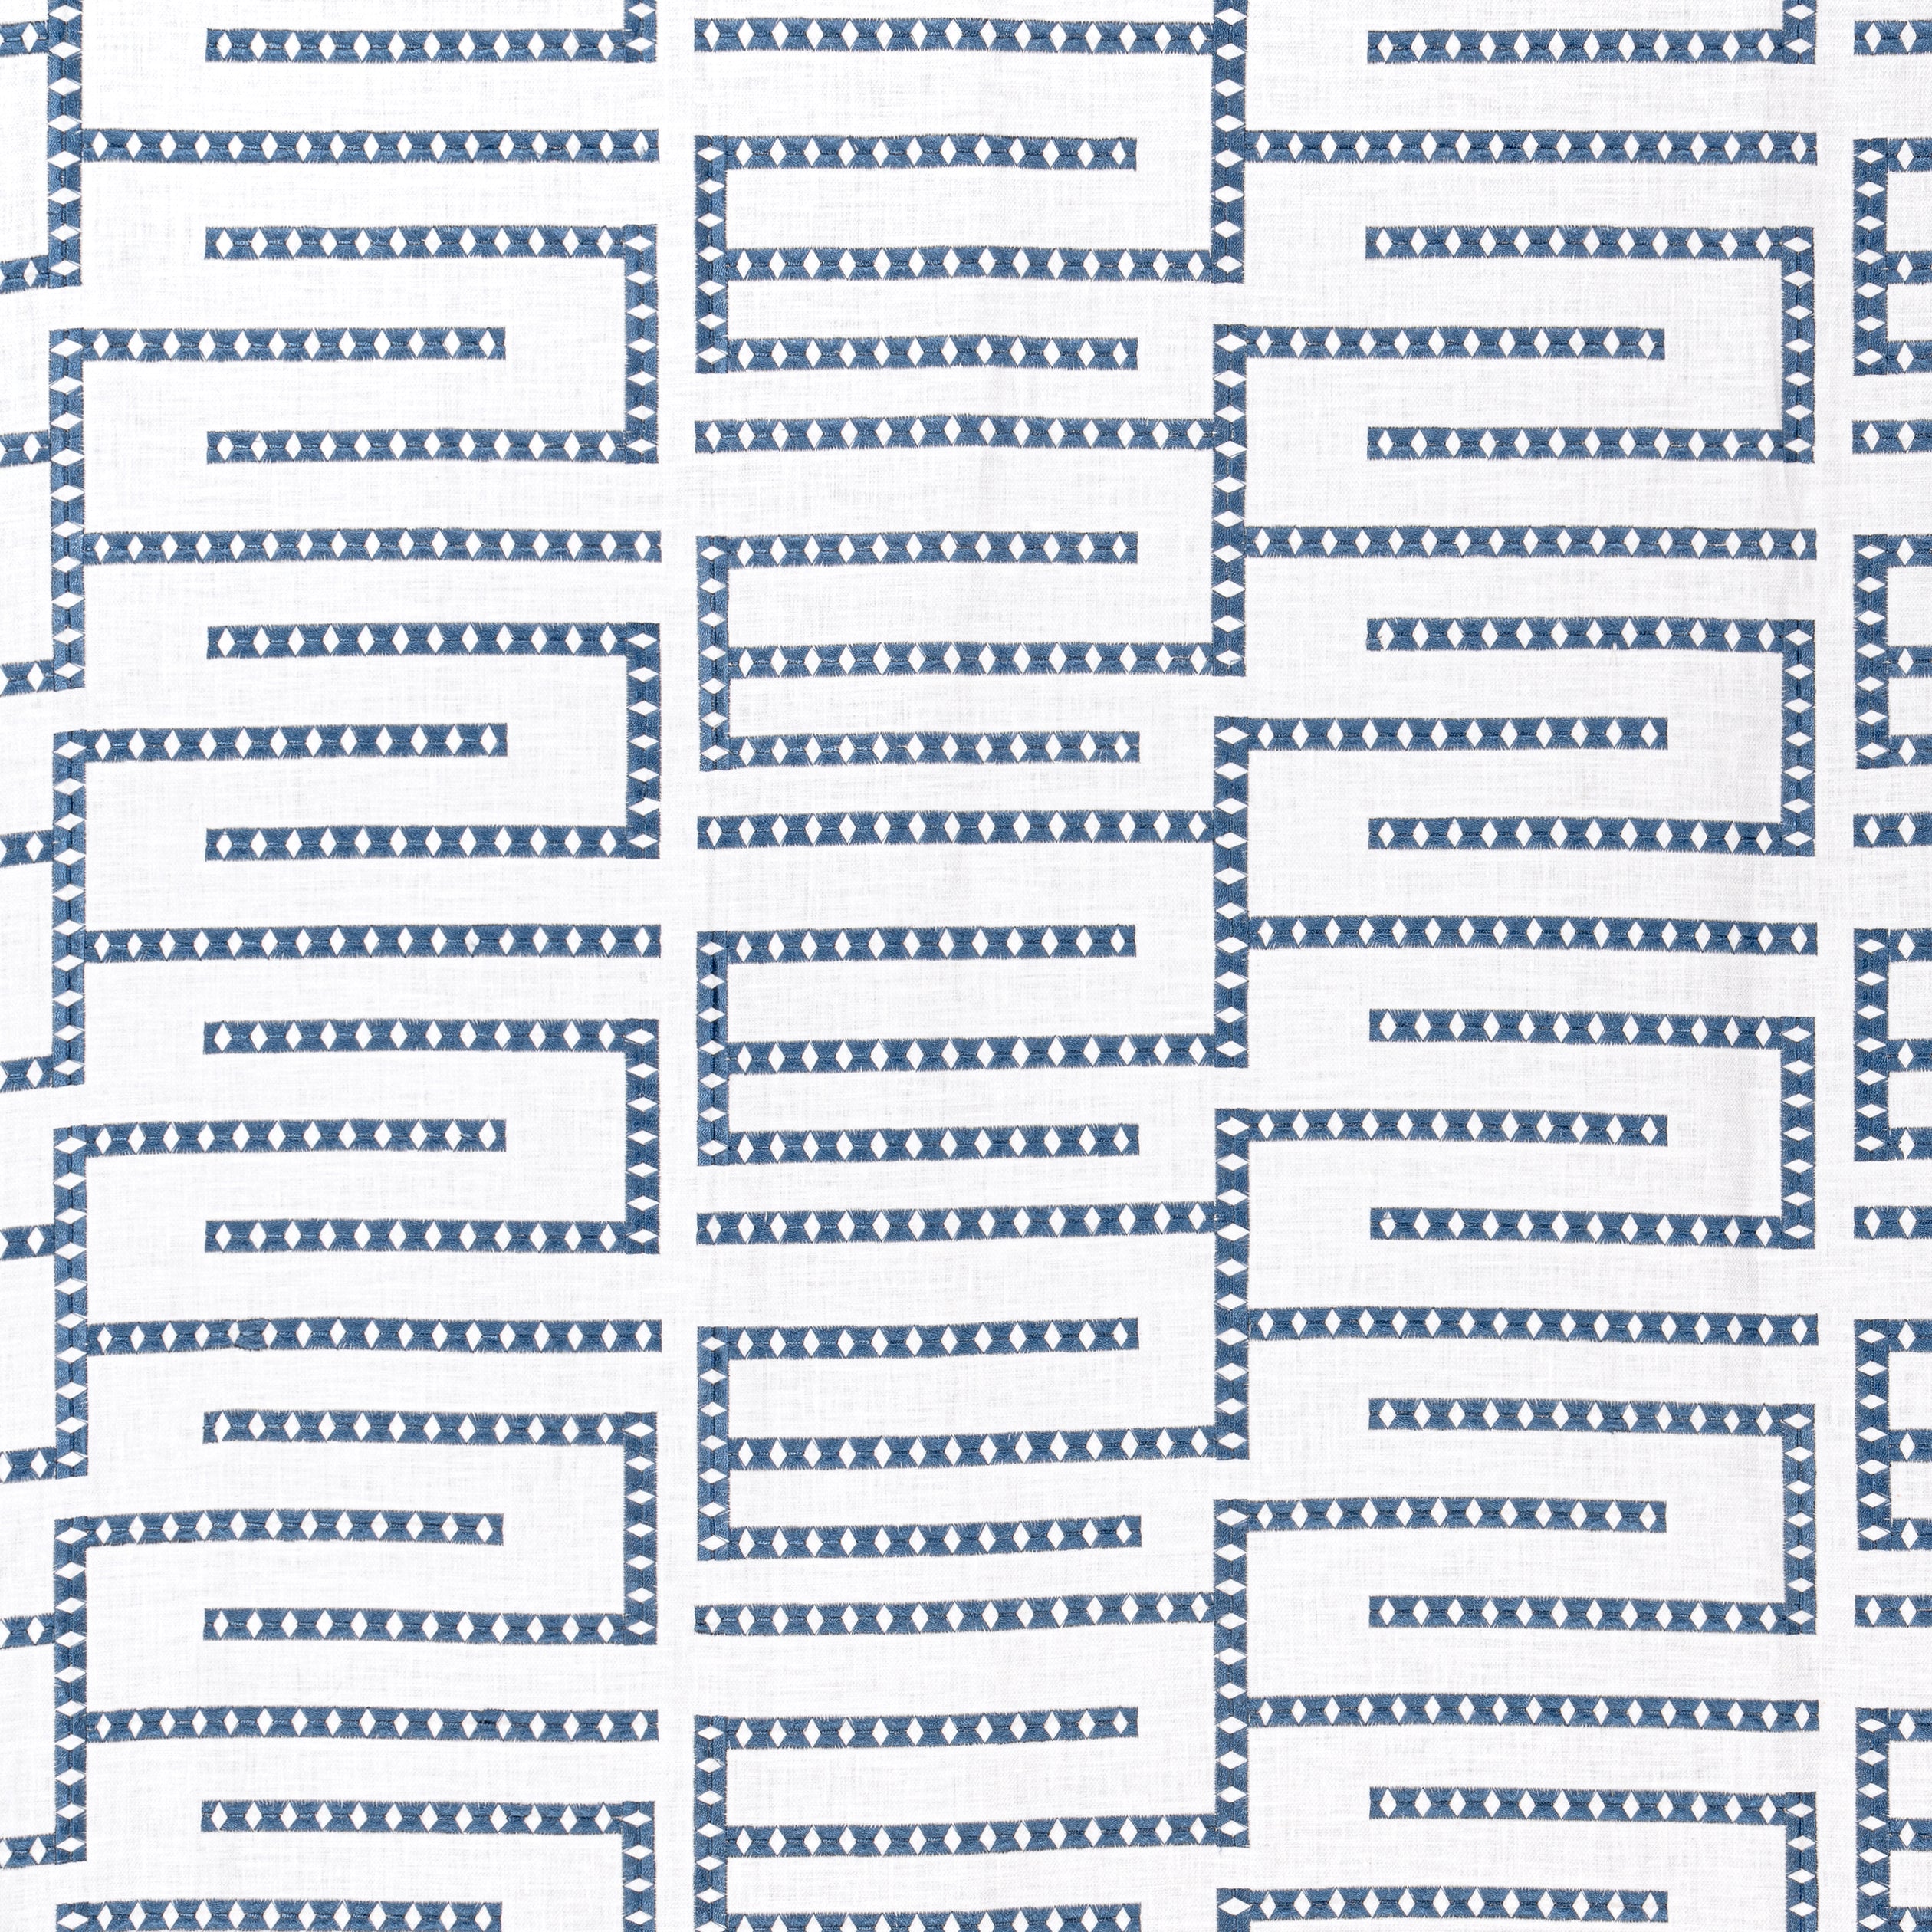 Architect Embroidery fabric in blue - pattern number W713627 - by Thibaut in the Grand Palace collection